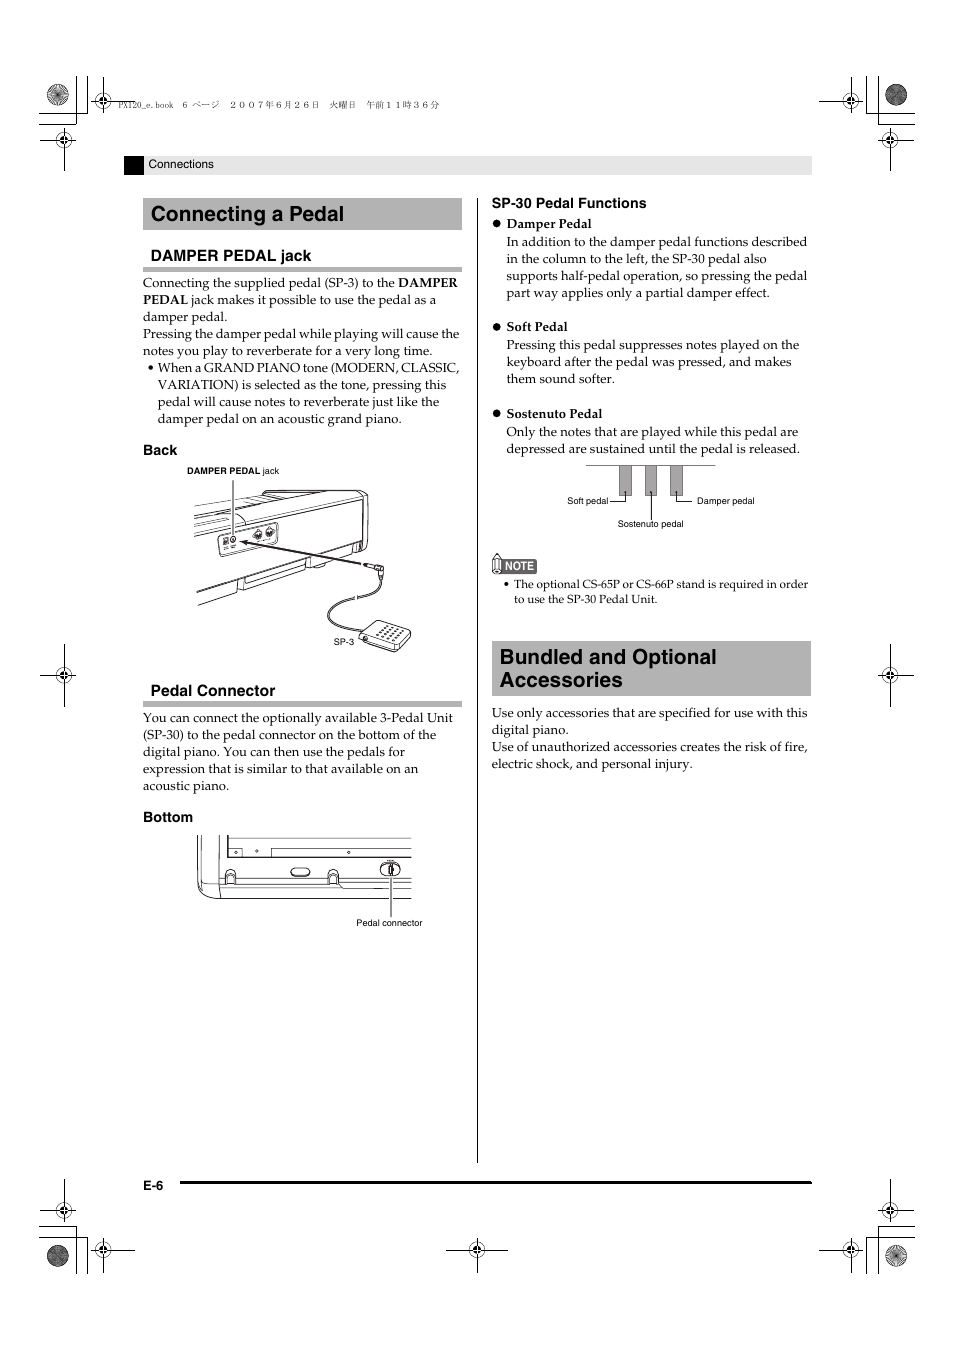 Connecting a pedal, Bundled and optional accessories | Casio privia PX-120  User Manual | Page 8 / 38 | Original mode